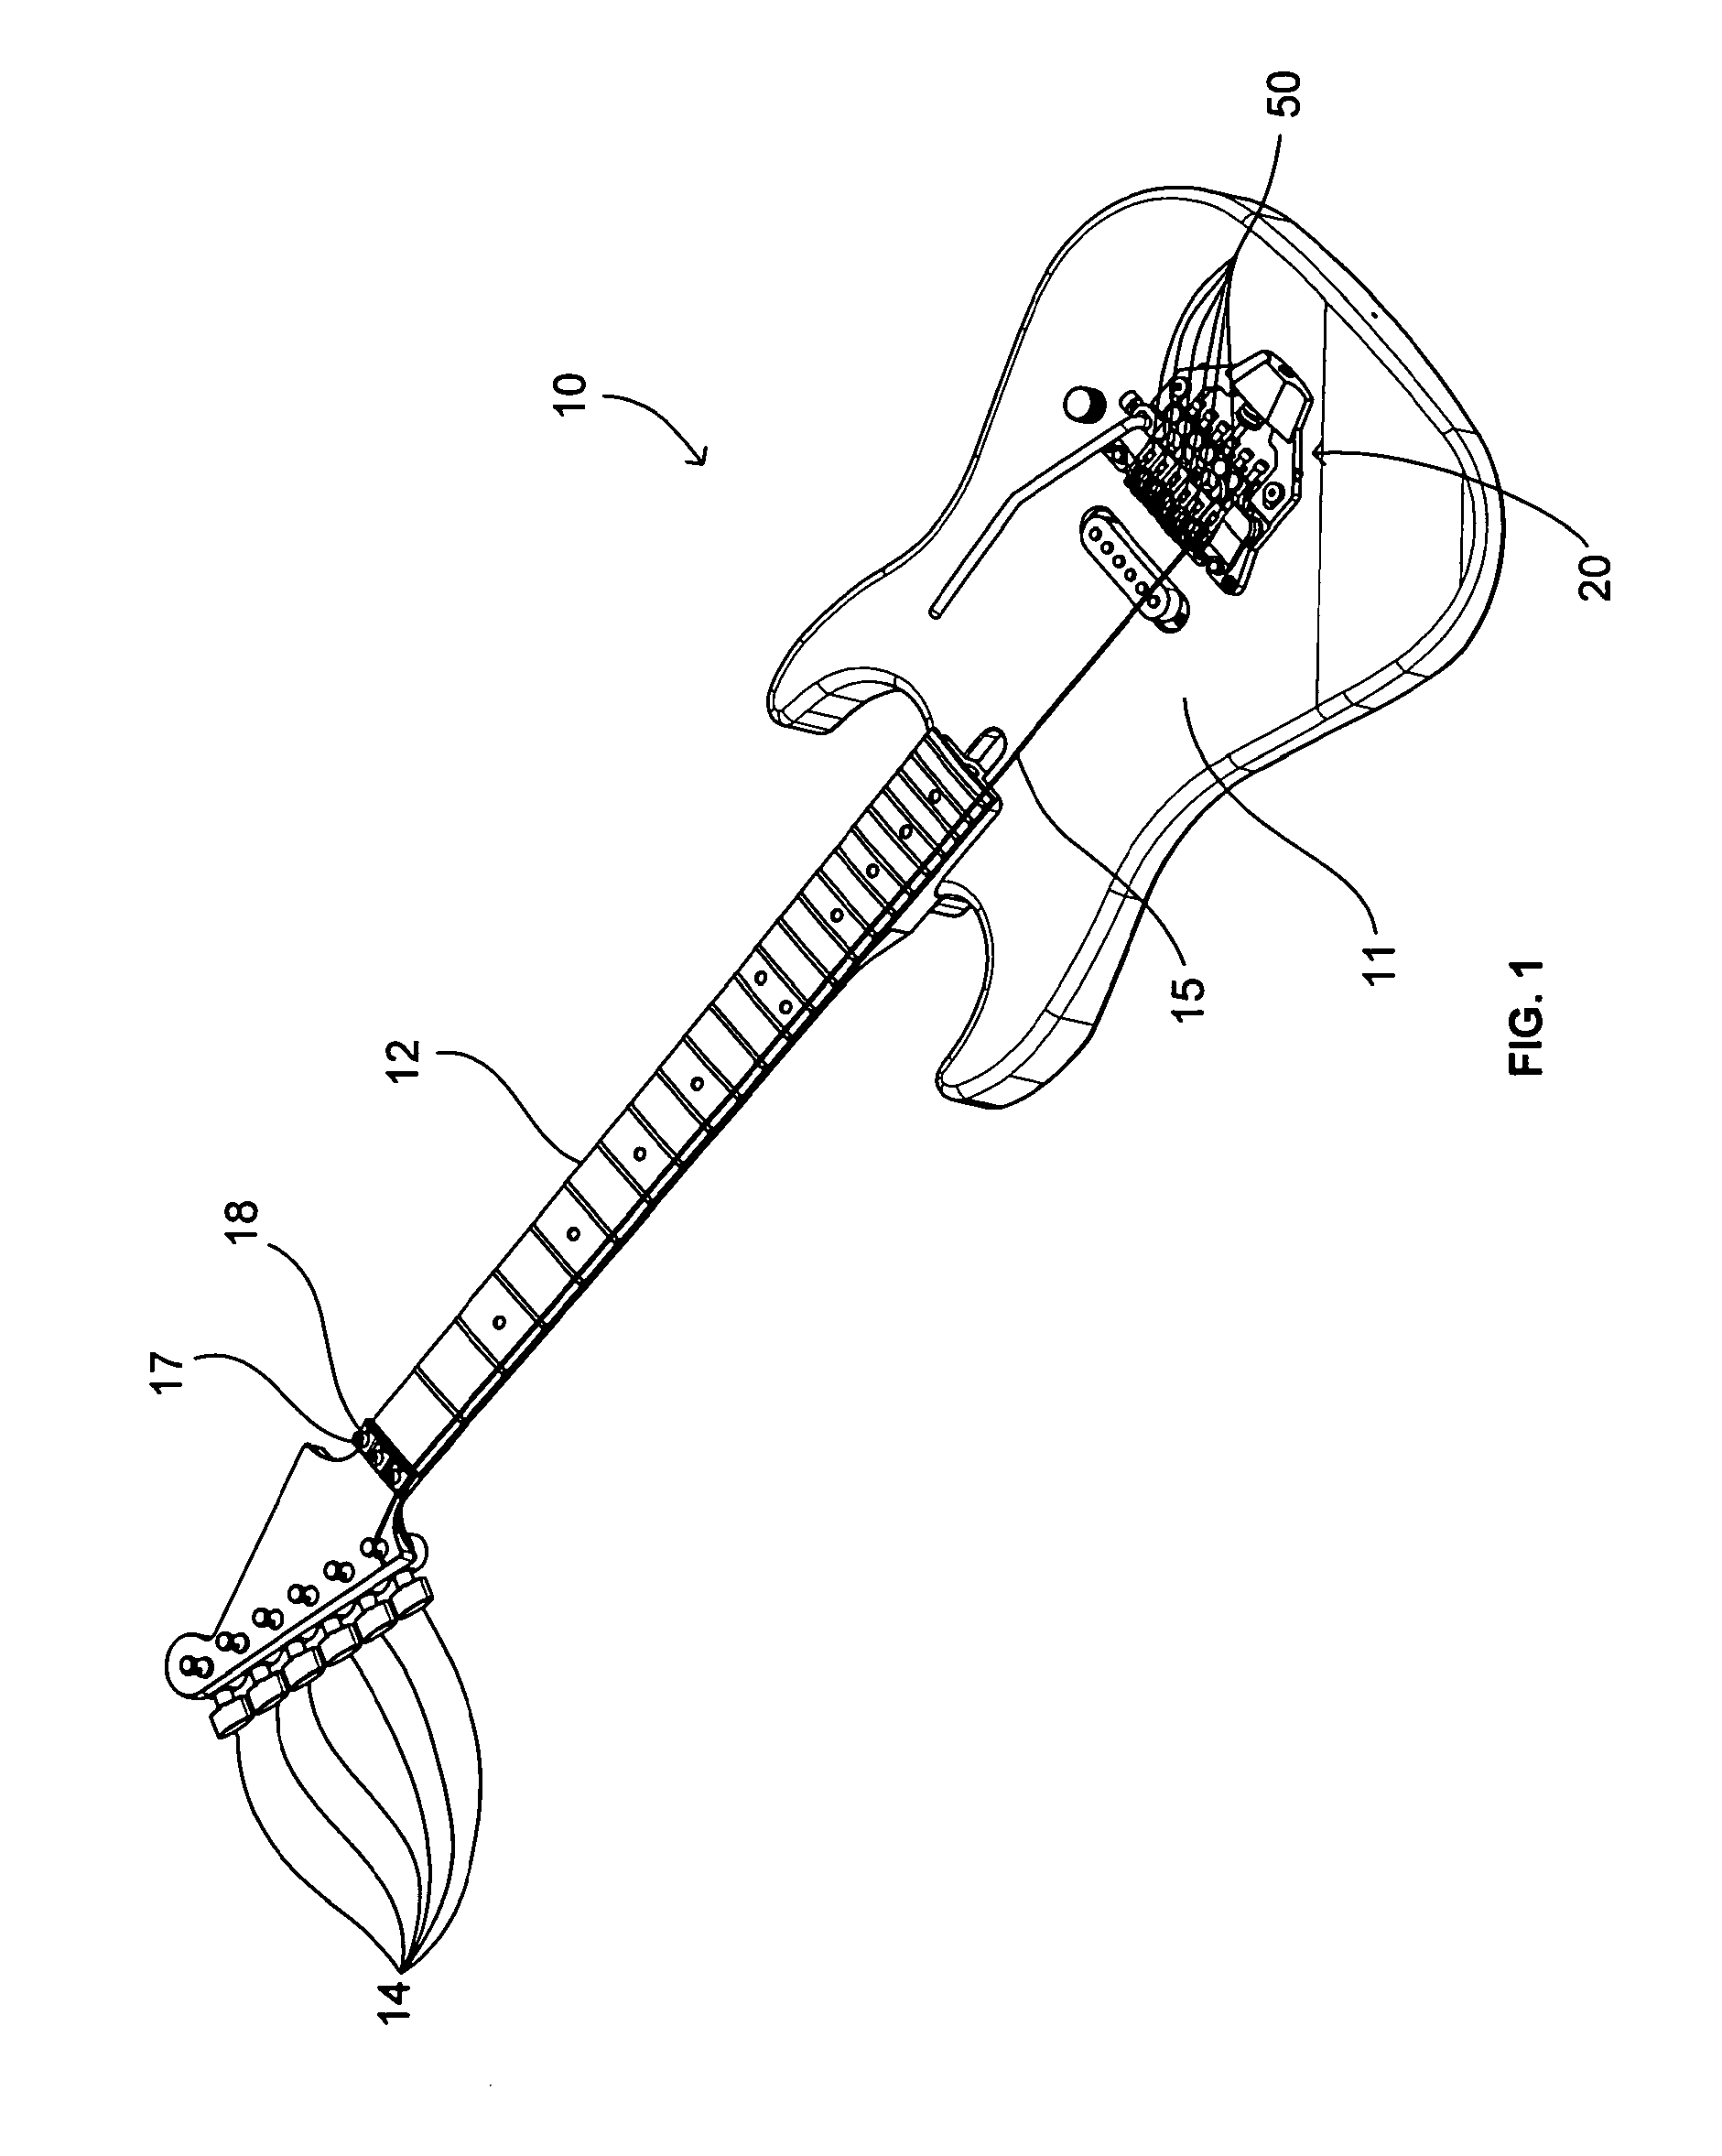 Top mounted tremolo and tuning apparatus